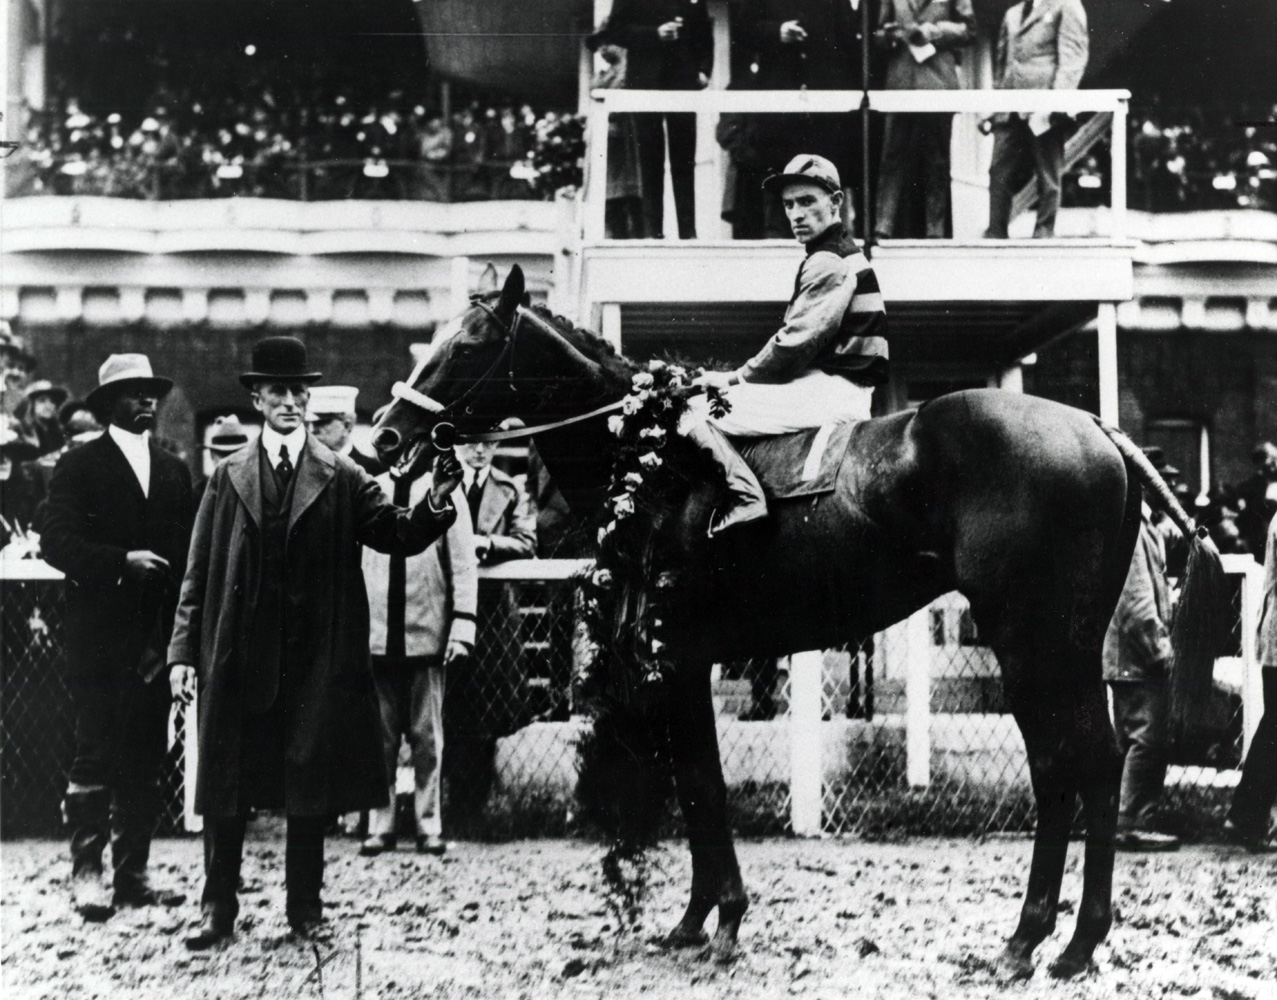 Sir Barton (John Loftus up) in the winner's circle for the 1919 Kentucky Derby (Churchill Downs Inc./Kinetic Corp. /Museum Collection)